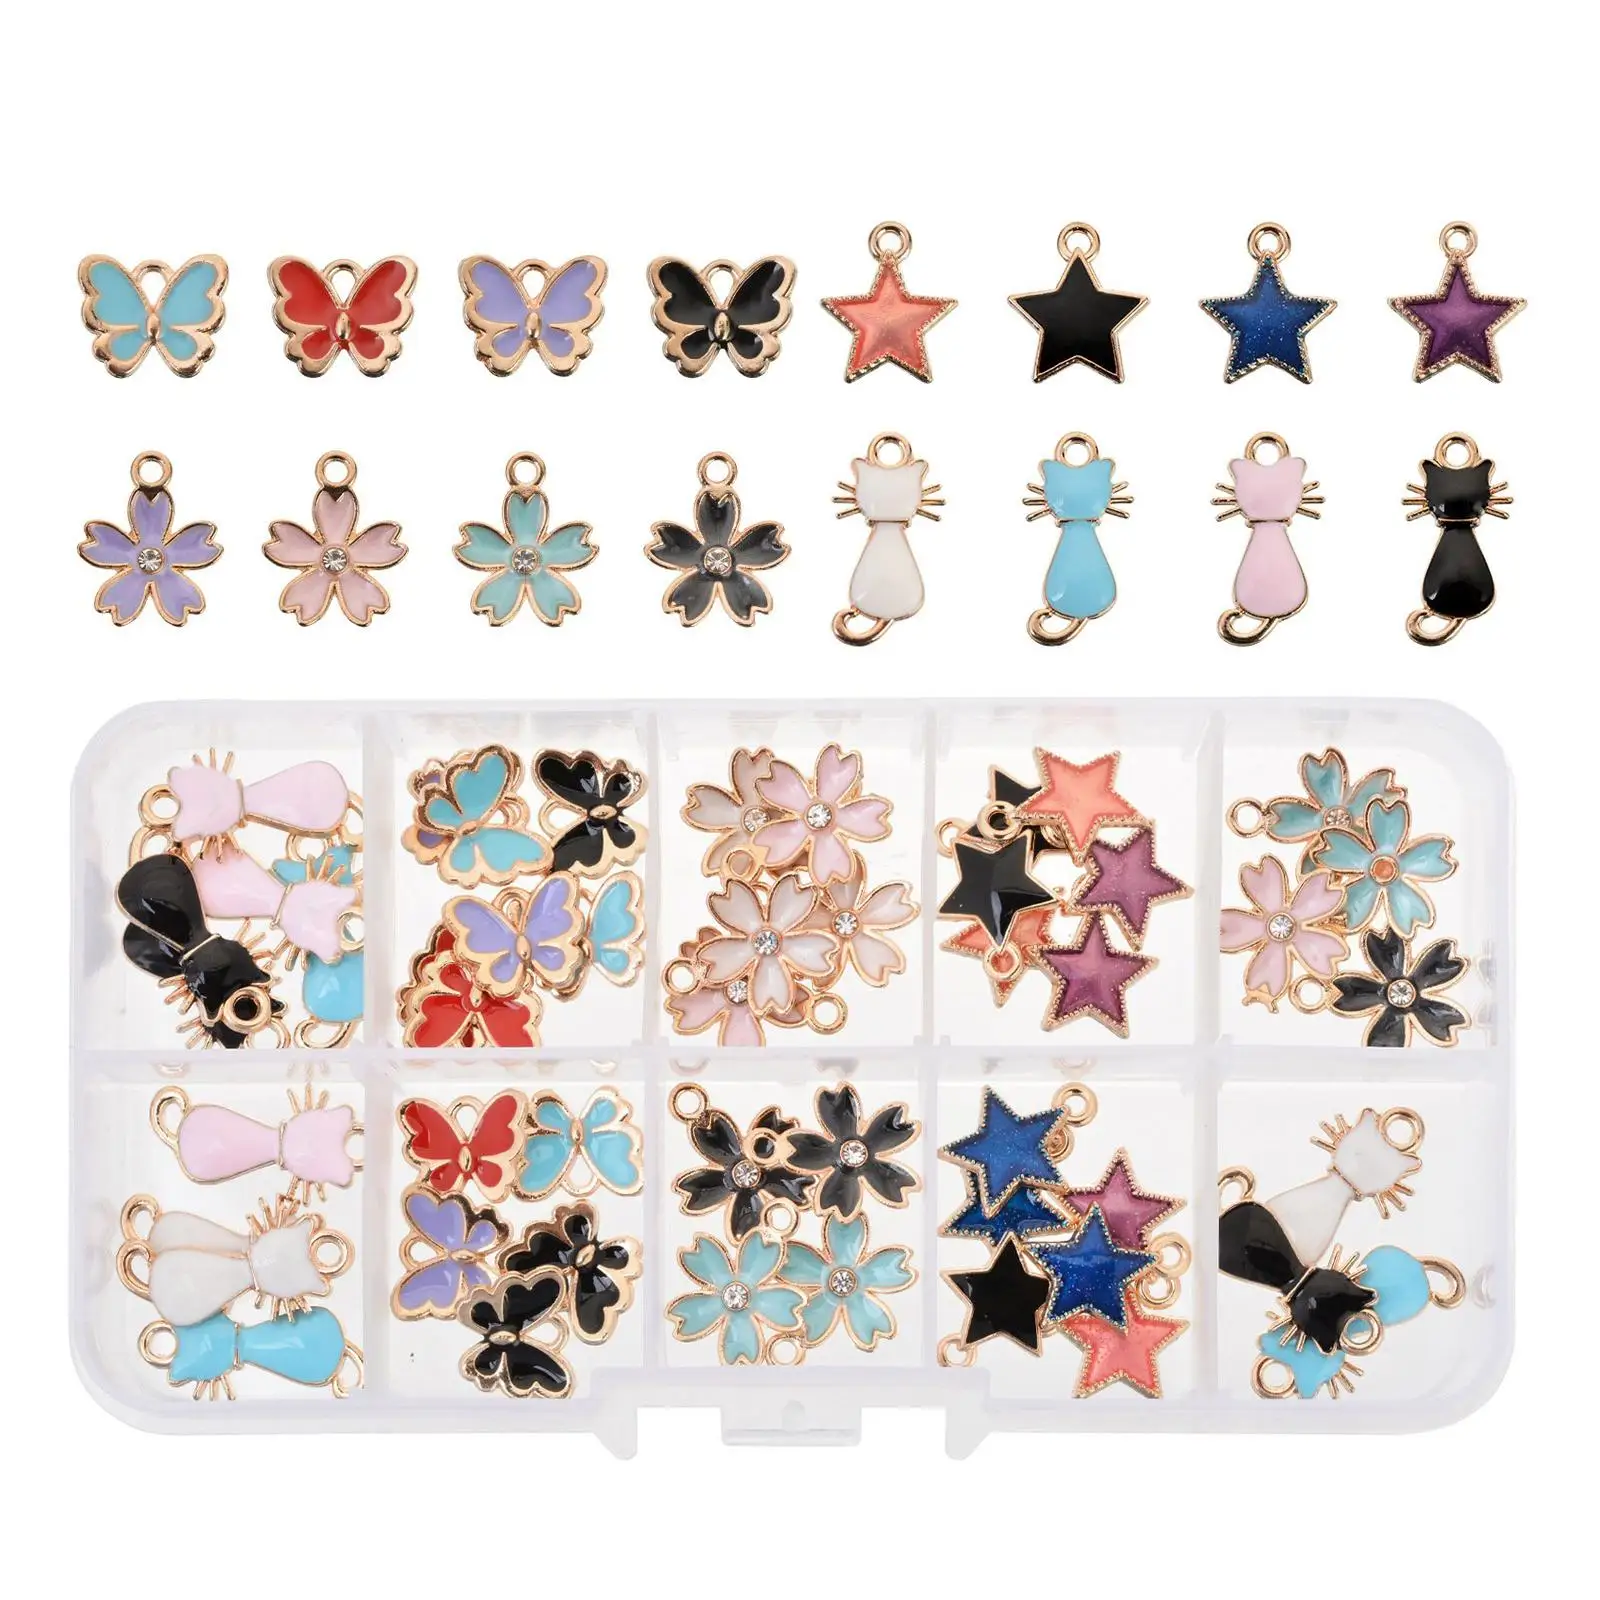 48x Assorted Enamel Charms Pendants 4 Styles Findings Dangles for Jewellery Making Bracelets Craft Gold Plated Mixed